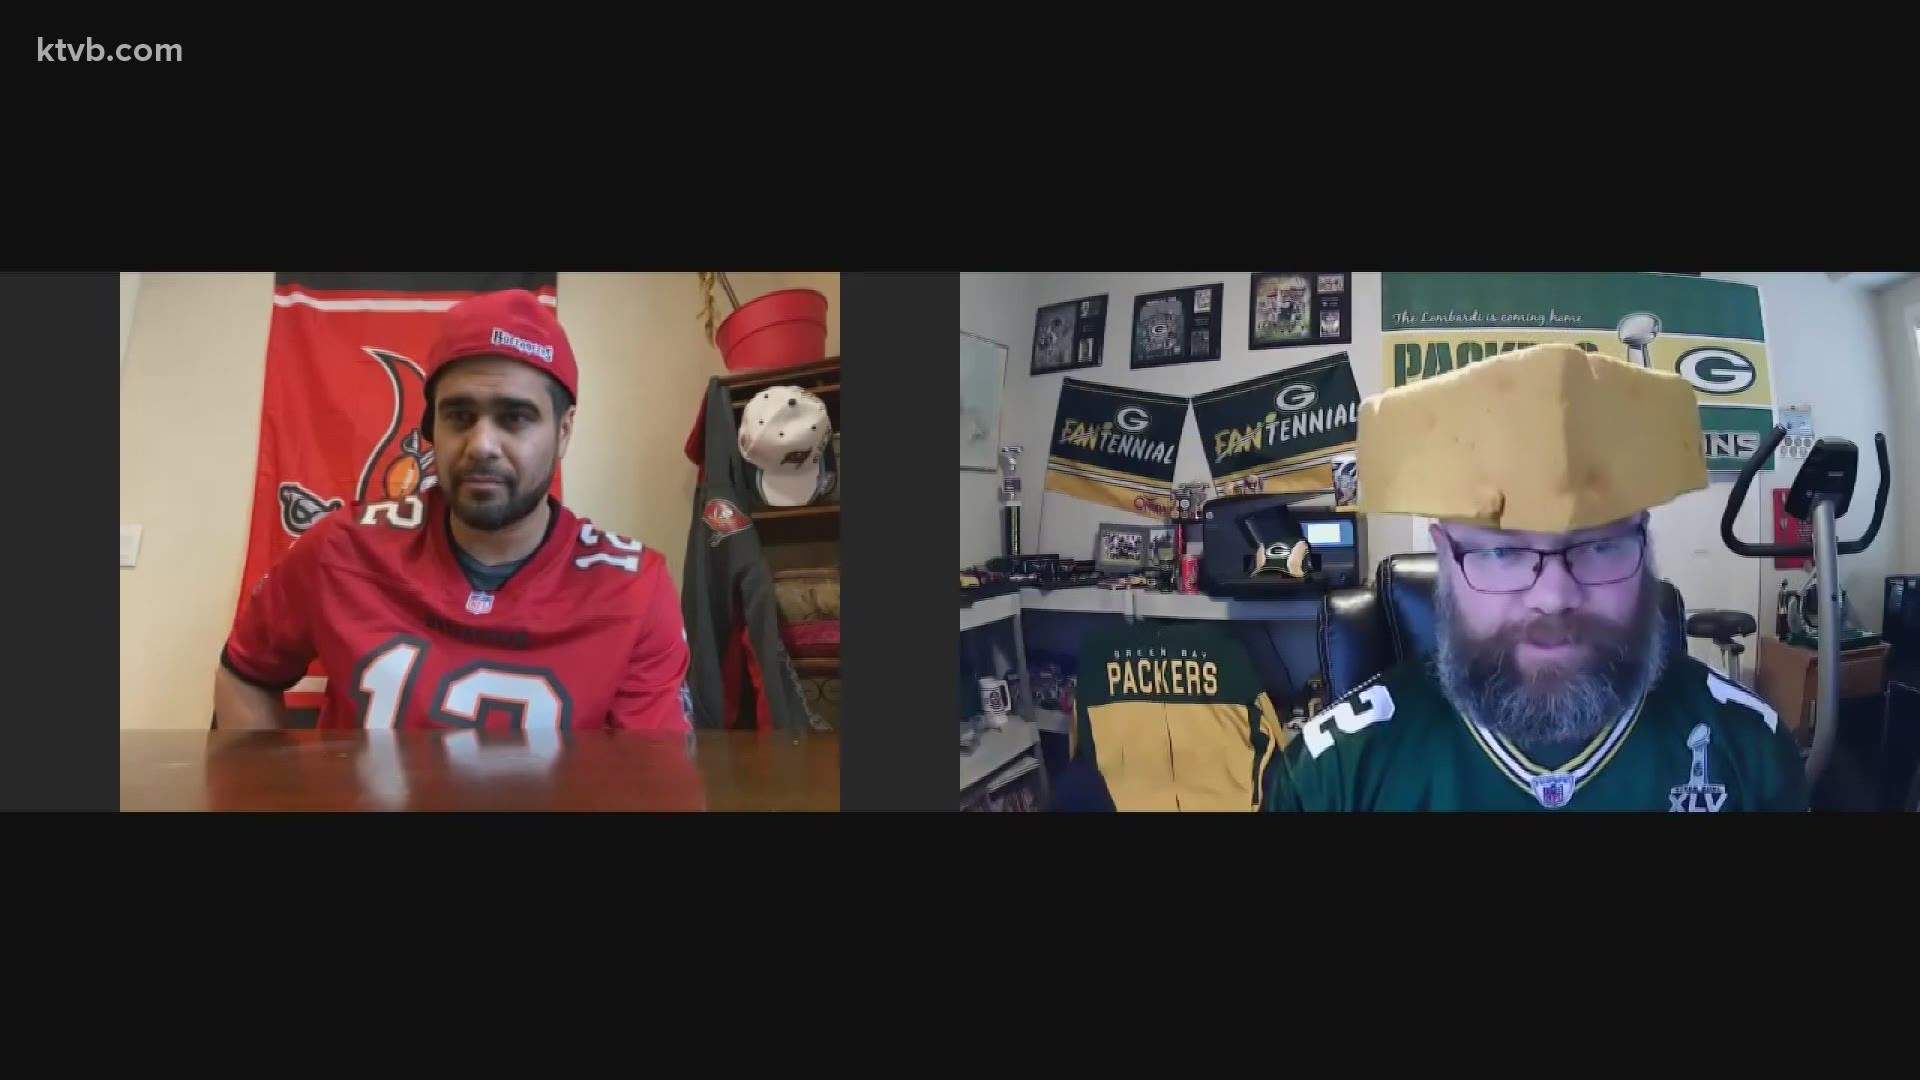 Packers fan John Ravina and Buccaneers fan Chris Stewart boast about their teams and super fandom ahead of the big game.